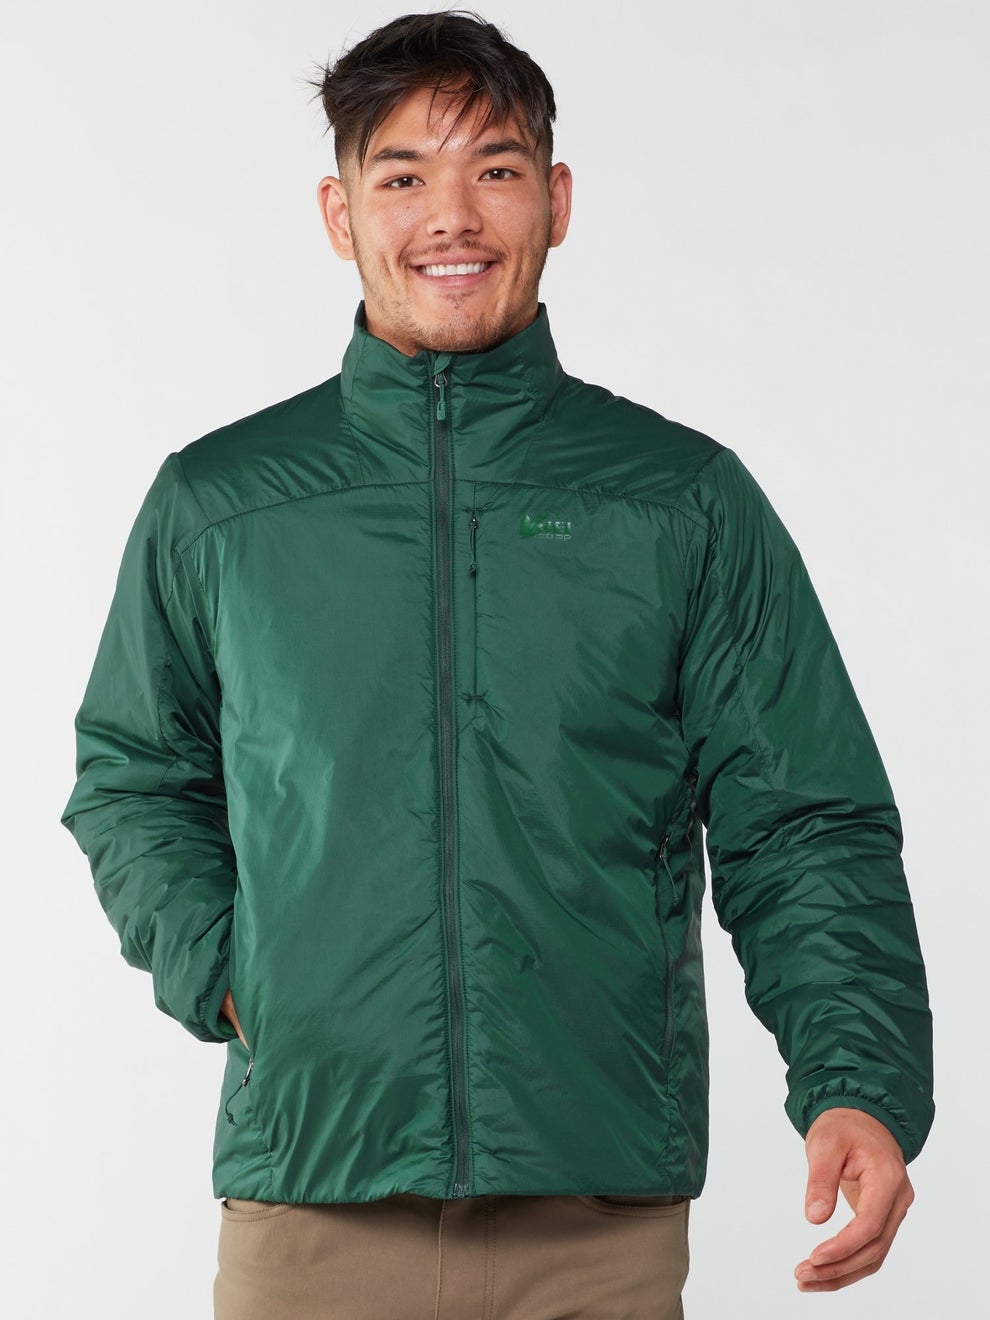 28 Pieces Of Outdoor Clothing For Warm Weather Fun